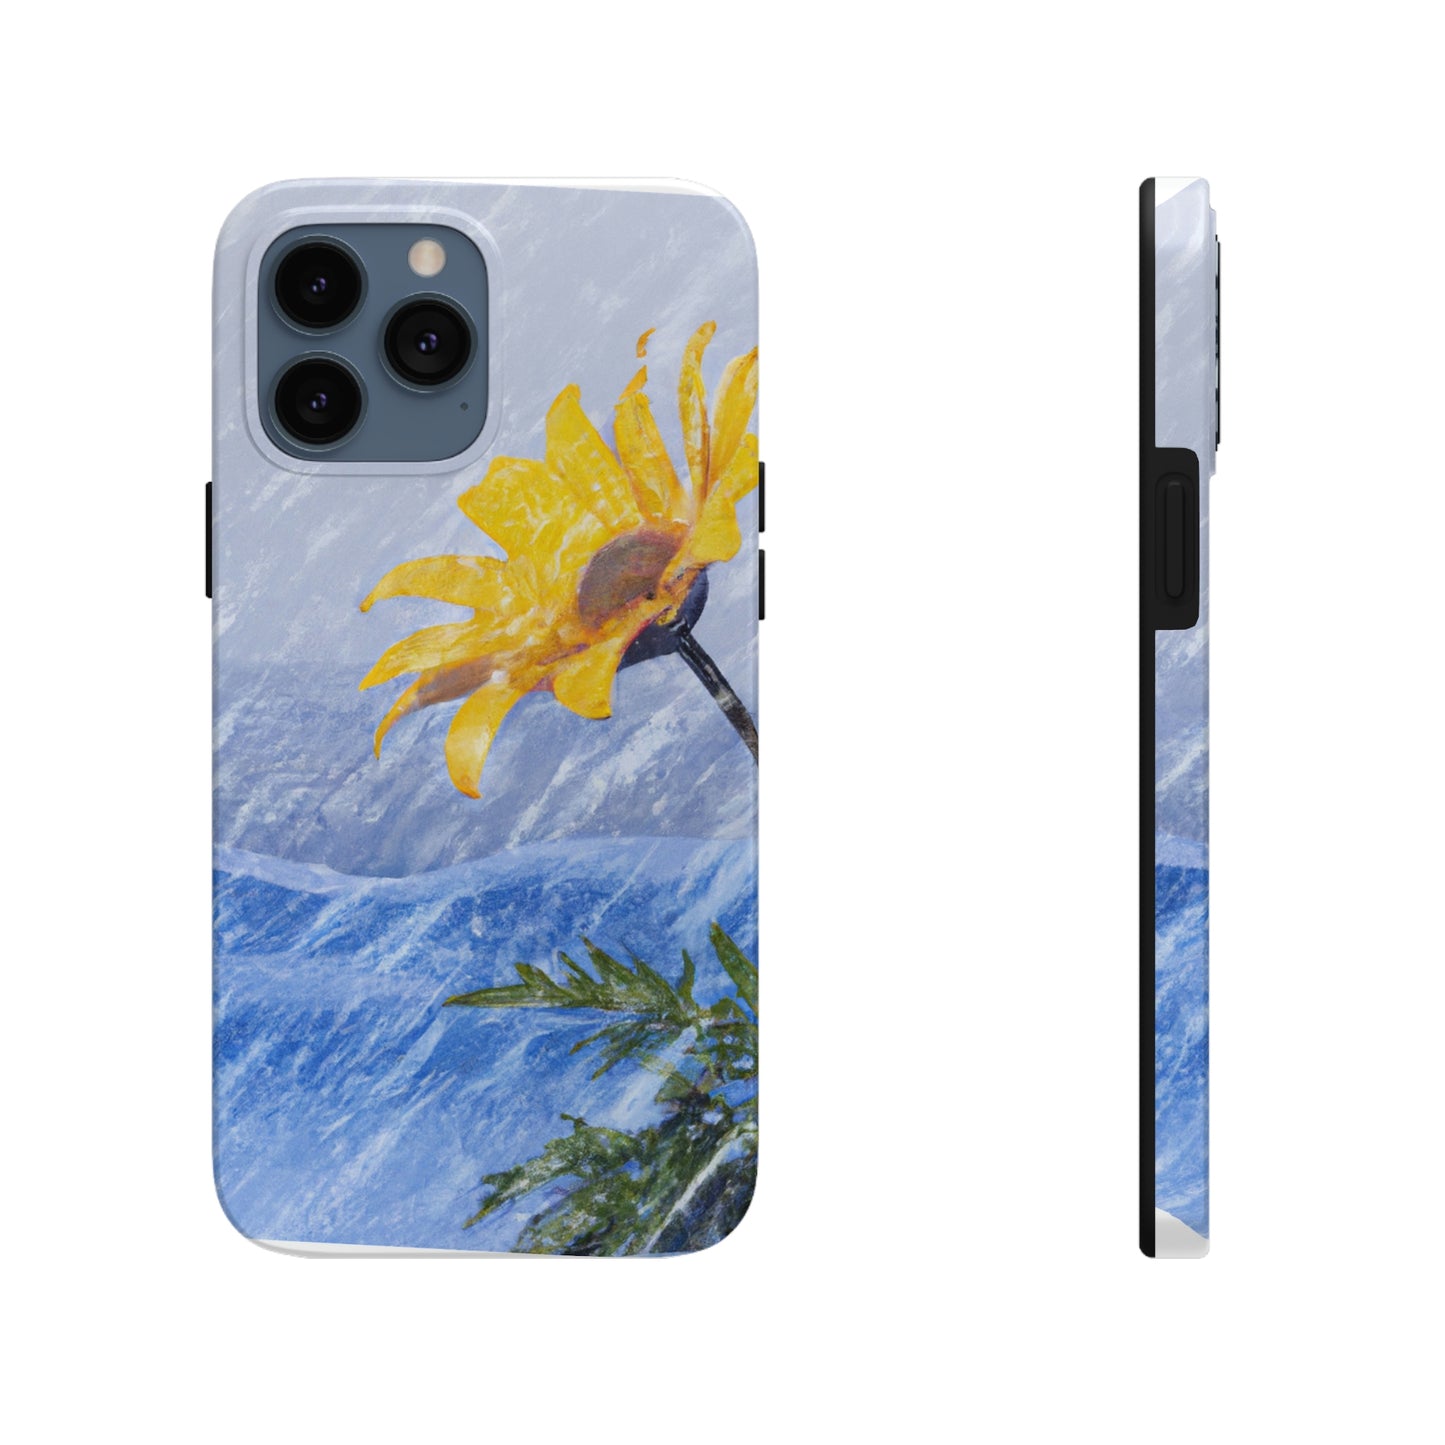 "A Burst of Color in the Glistening White: The Miracle of a Flower Blooms in a Snowstorm" - The Alien Tough Phone Cases